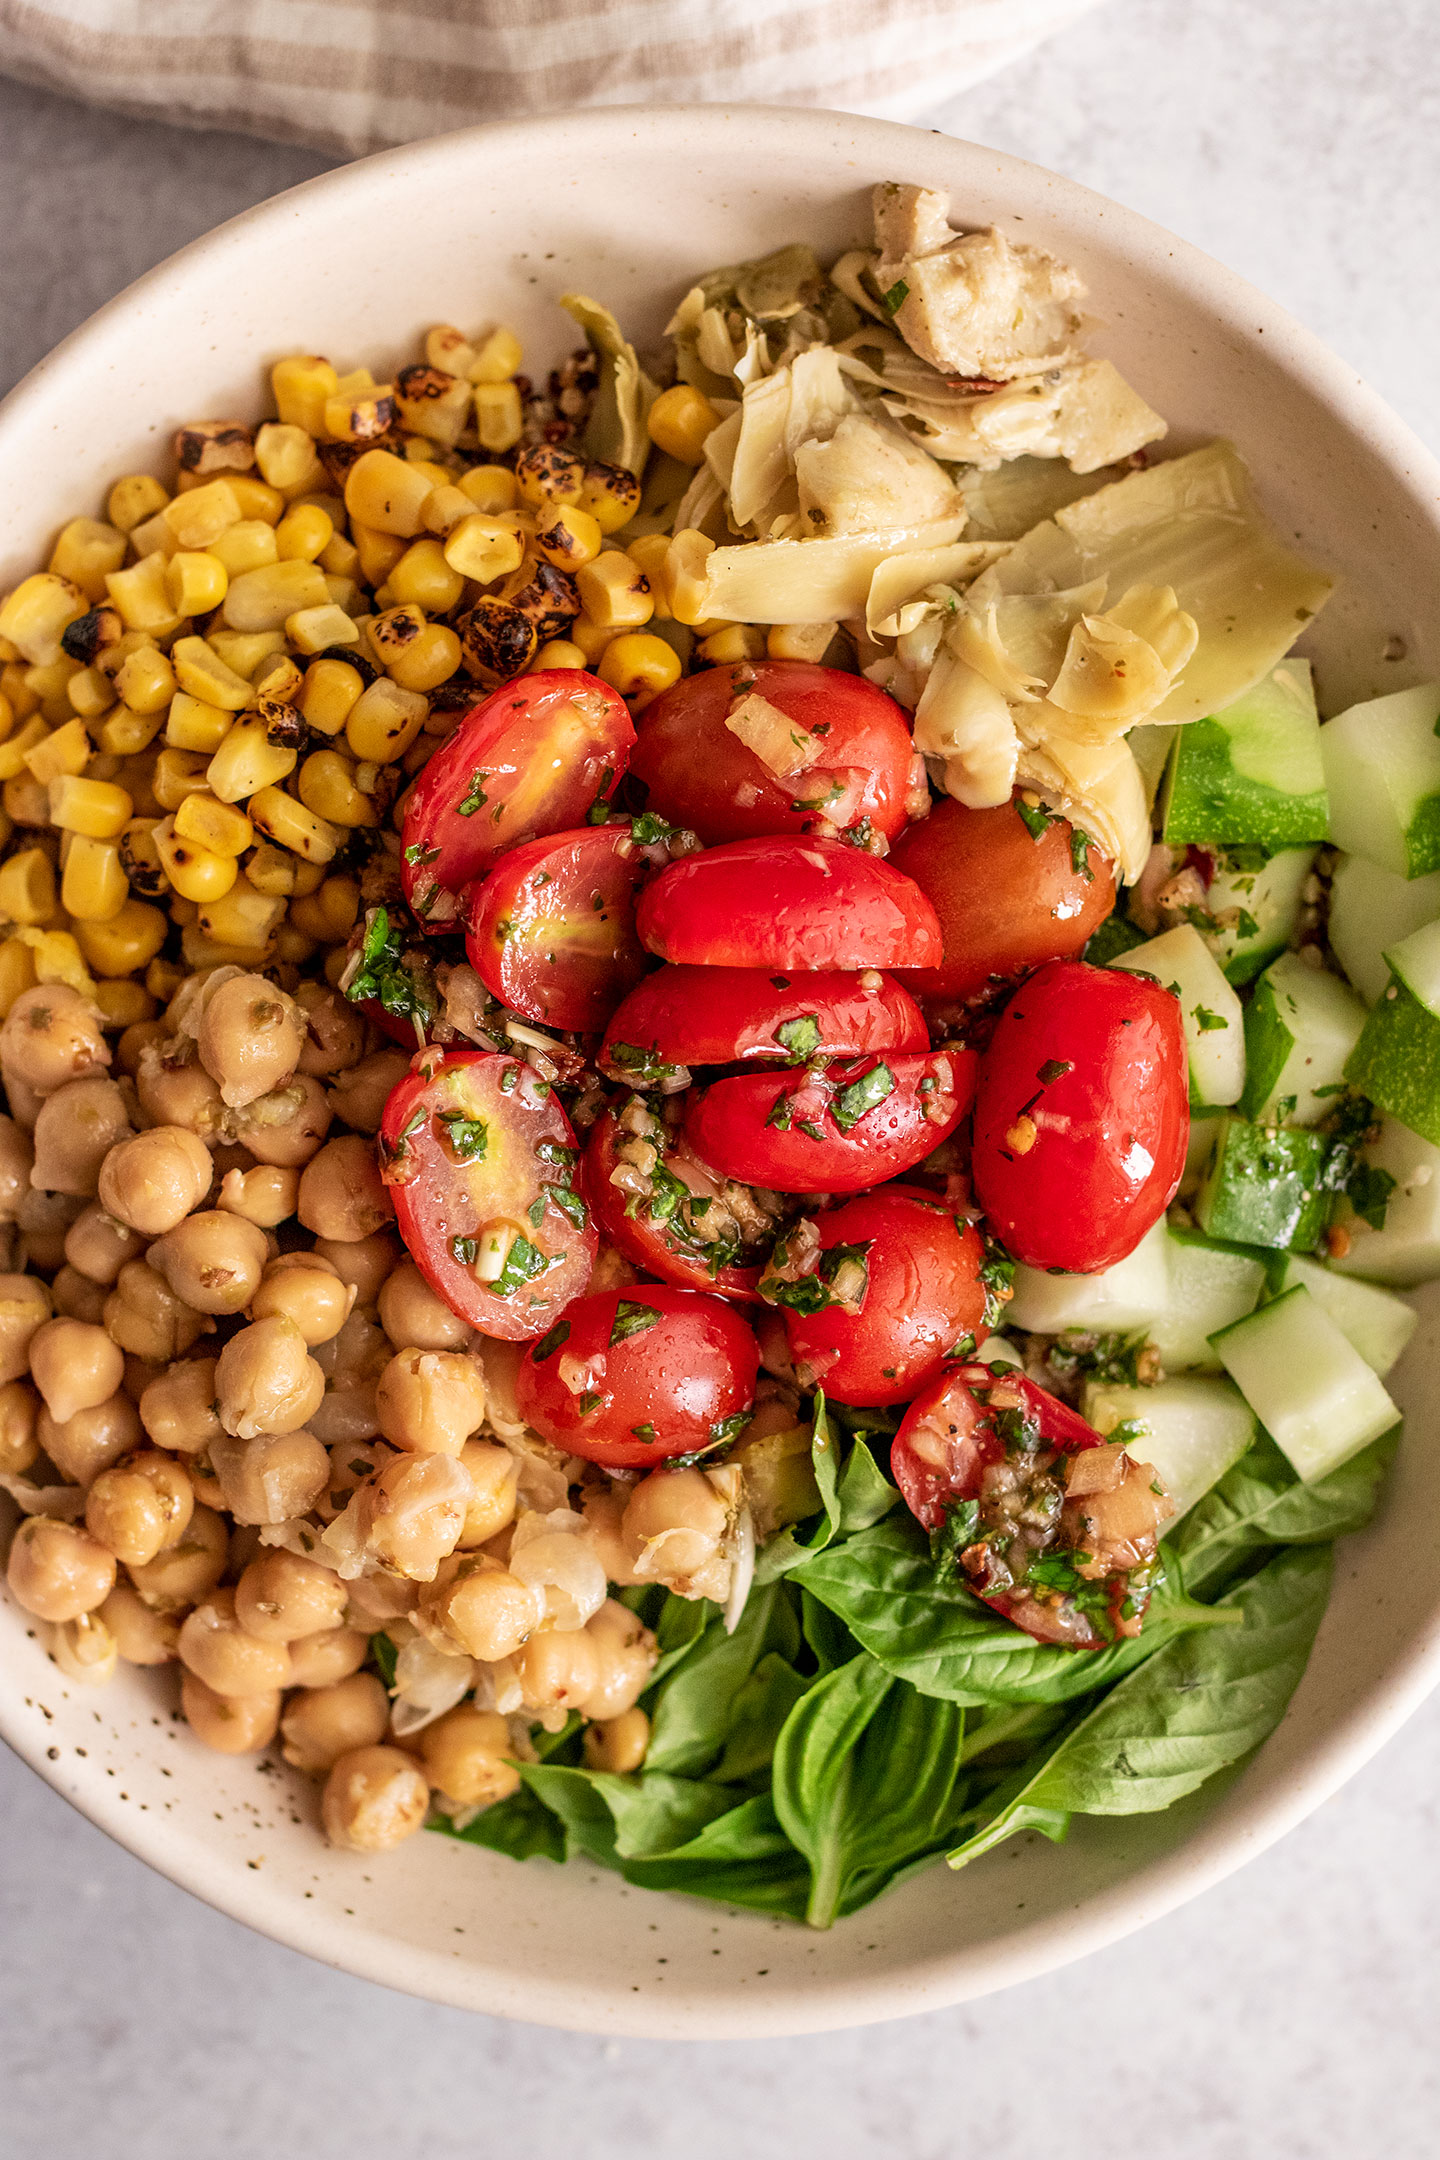 Giant bowl of quinoa topped with corn, chickpeas, artichoke hearts, cucumbers, basil and marinated cherry tomatoes.